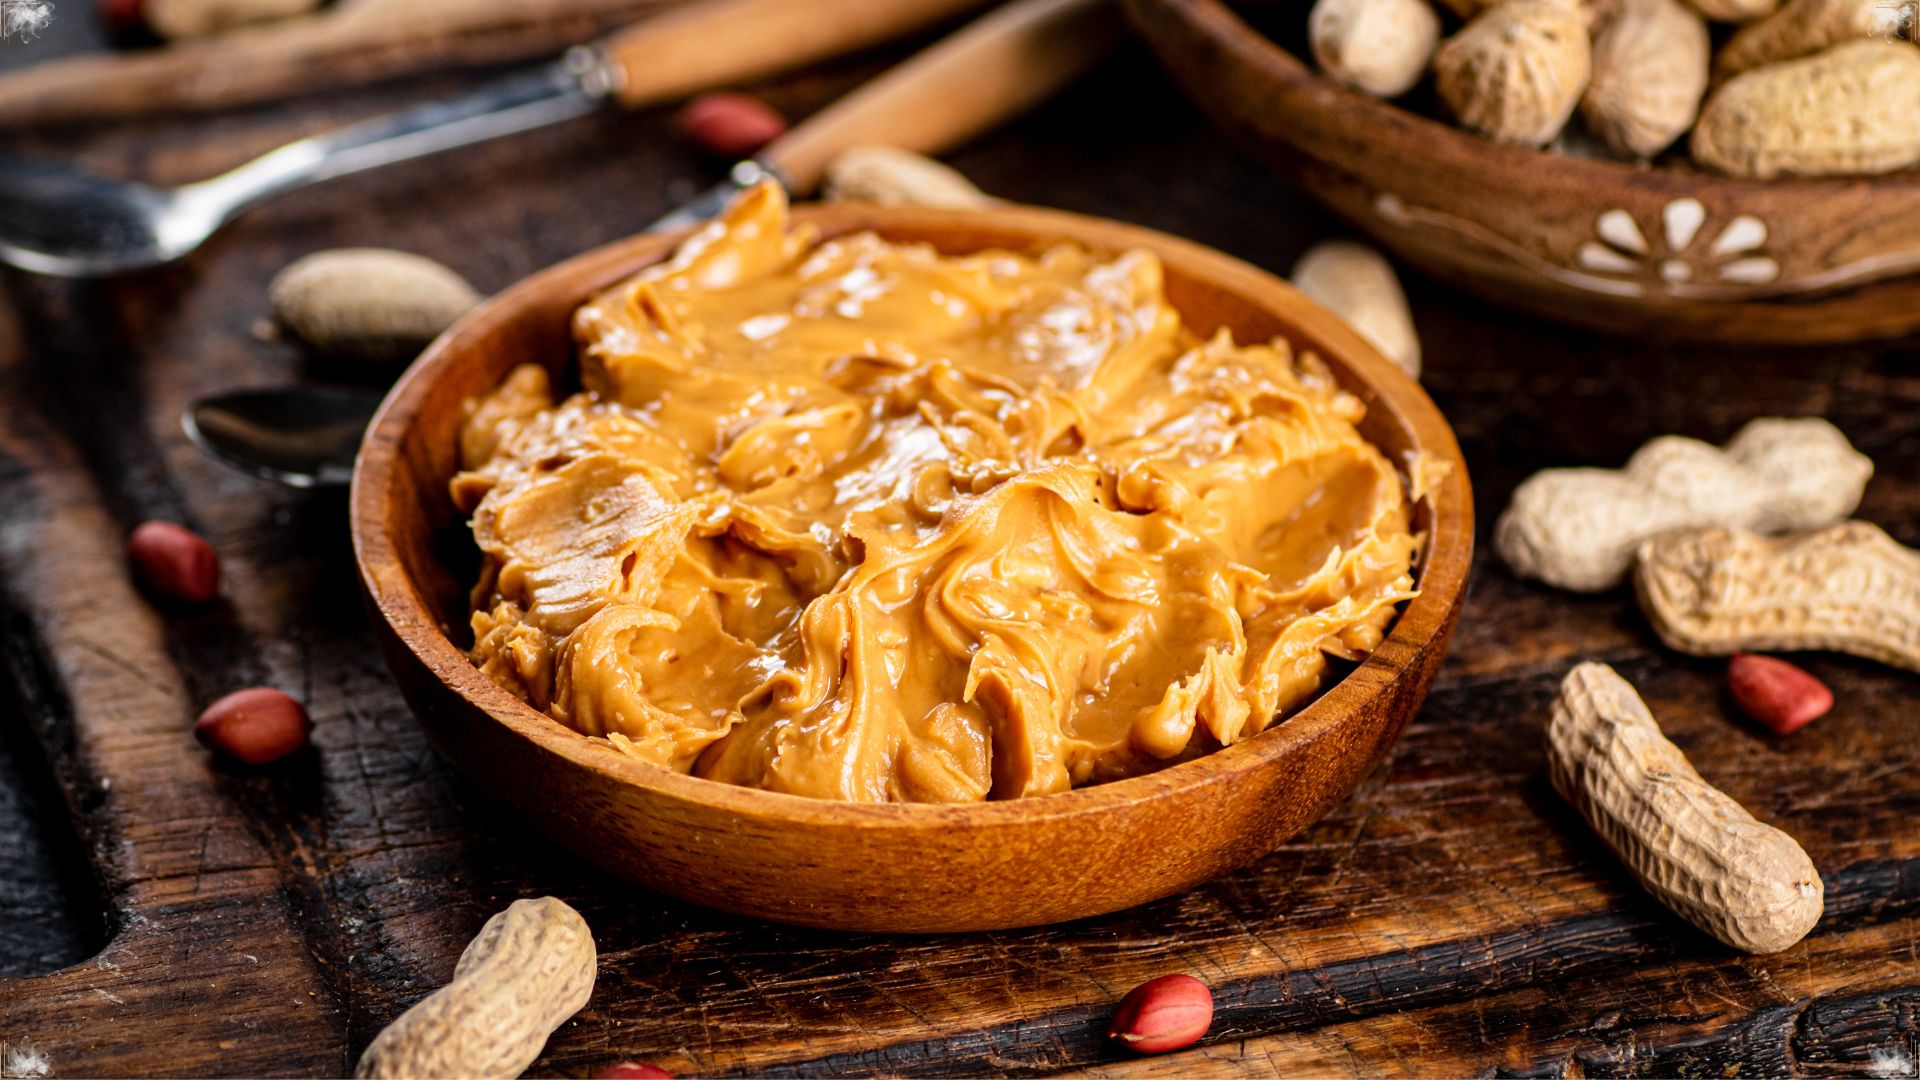 Peanut Butter: A Nutty and Versatile Spread